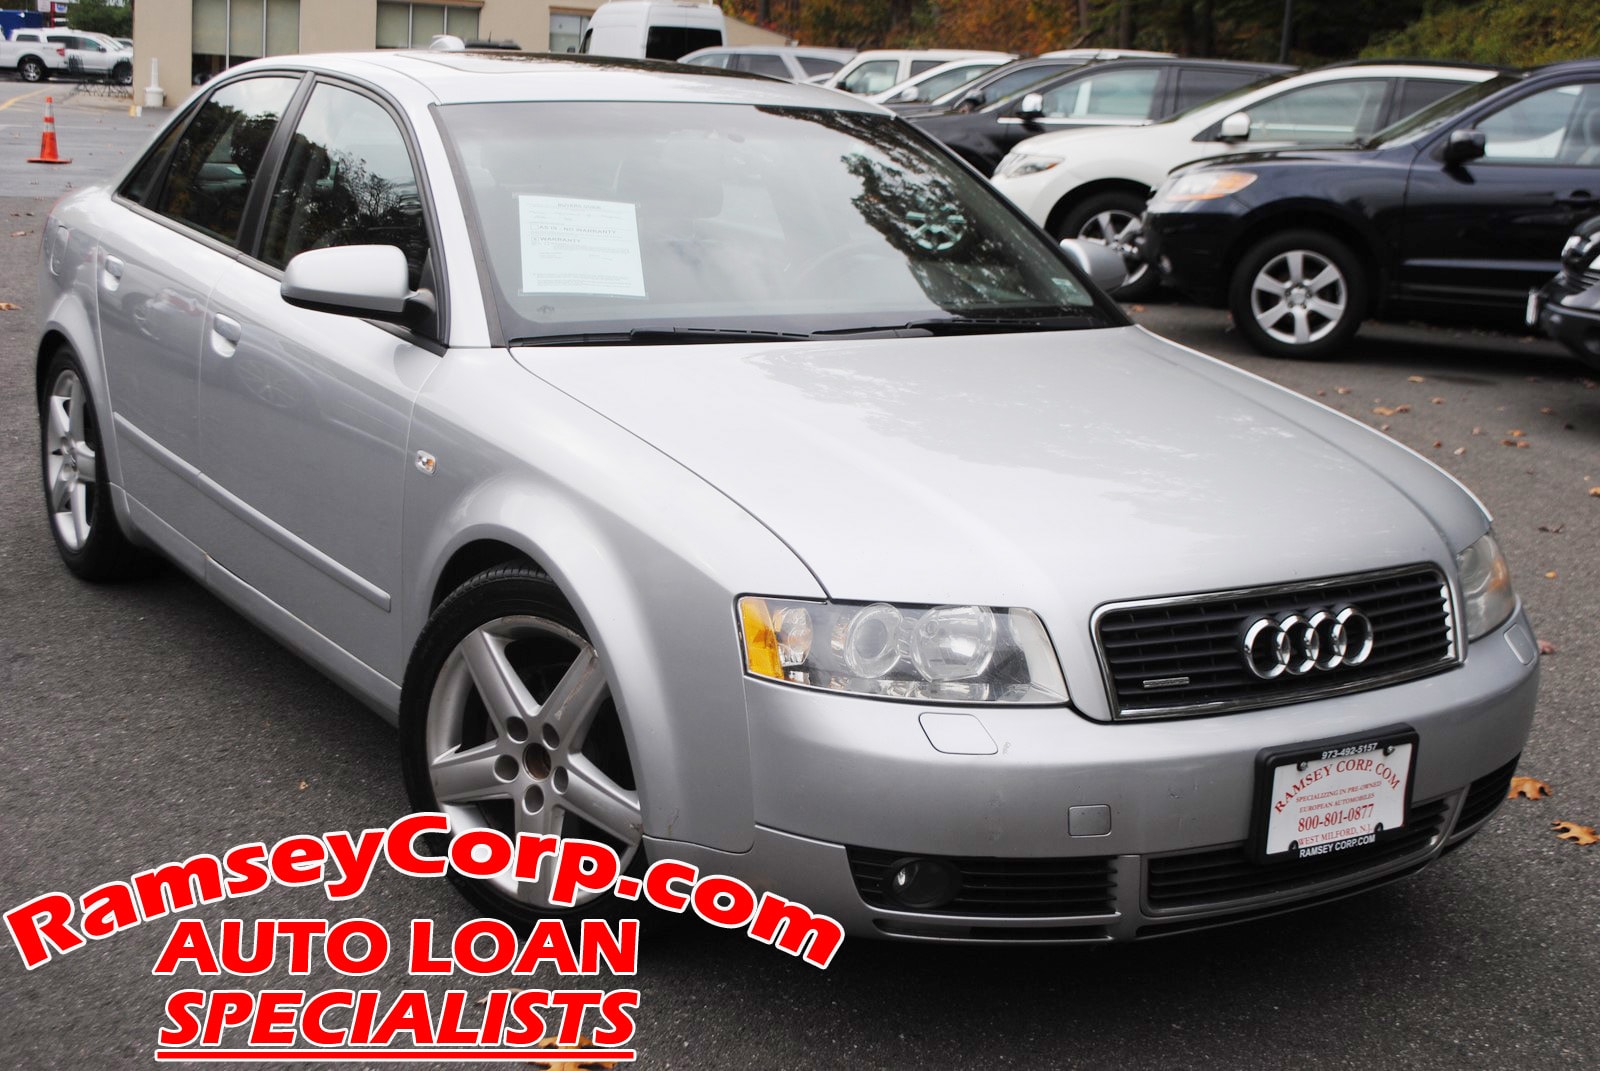 Used 2004 Audi A4 For Sale at Ramsey Corp. | VIN: WAULC68E54A295746